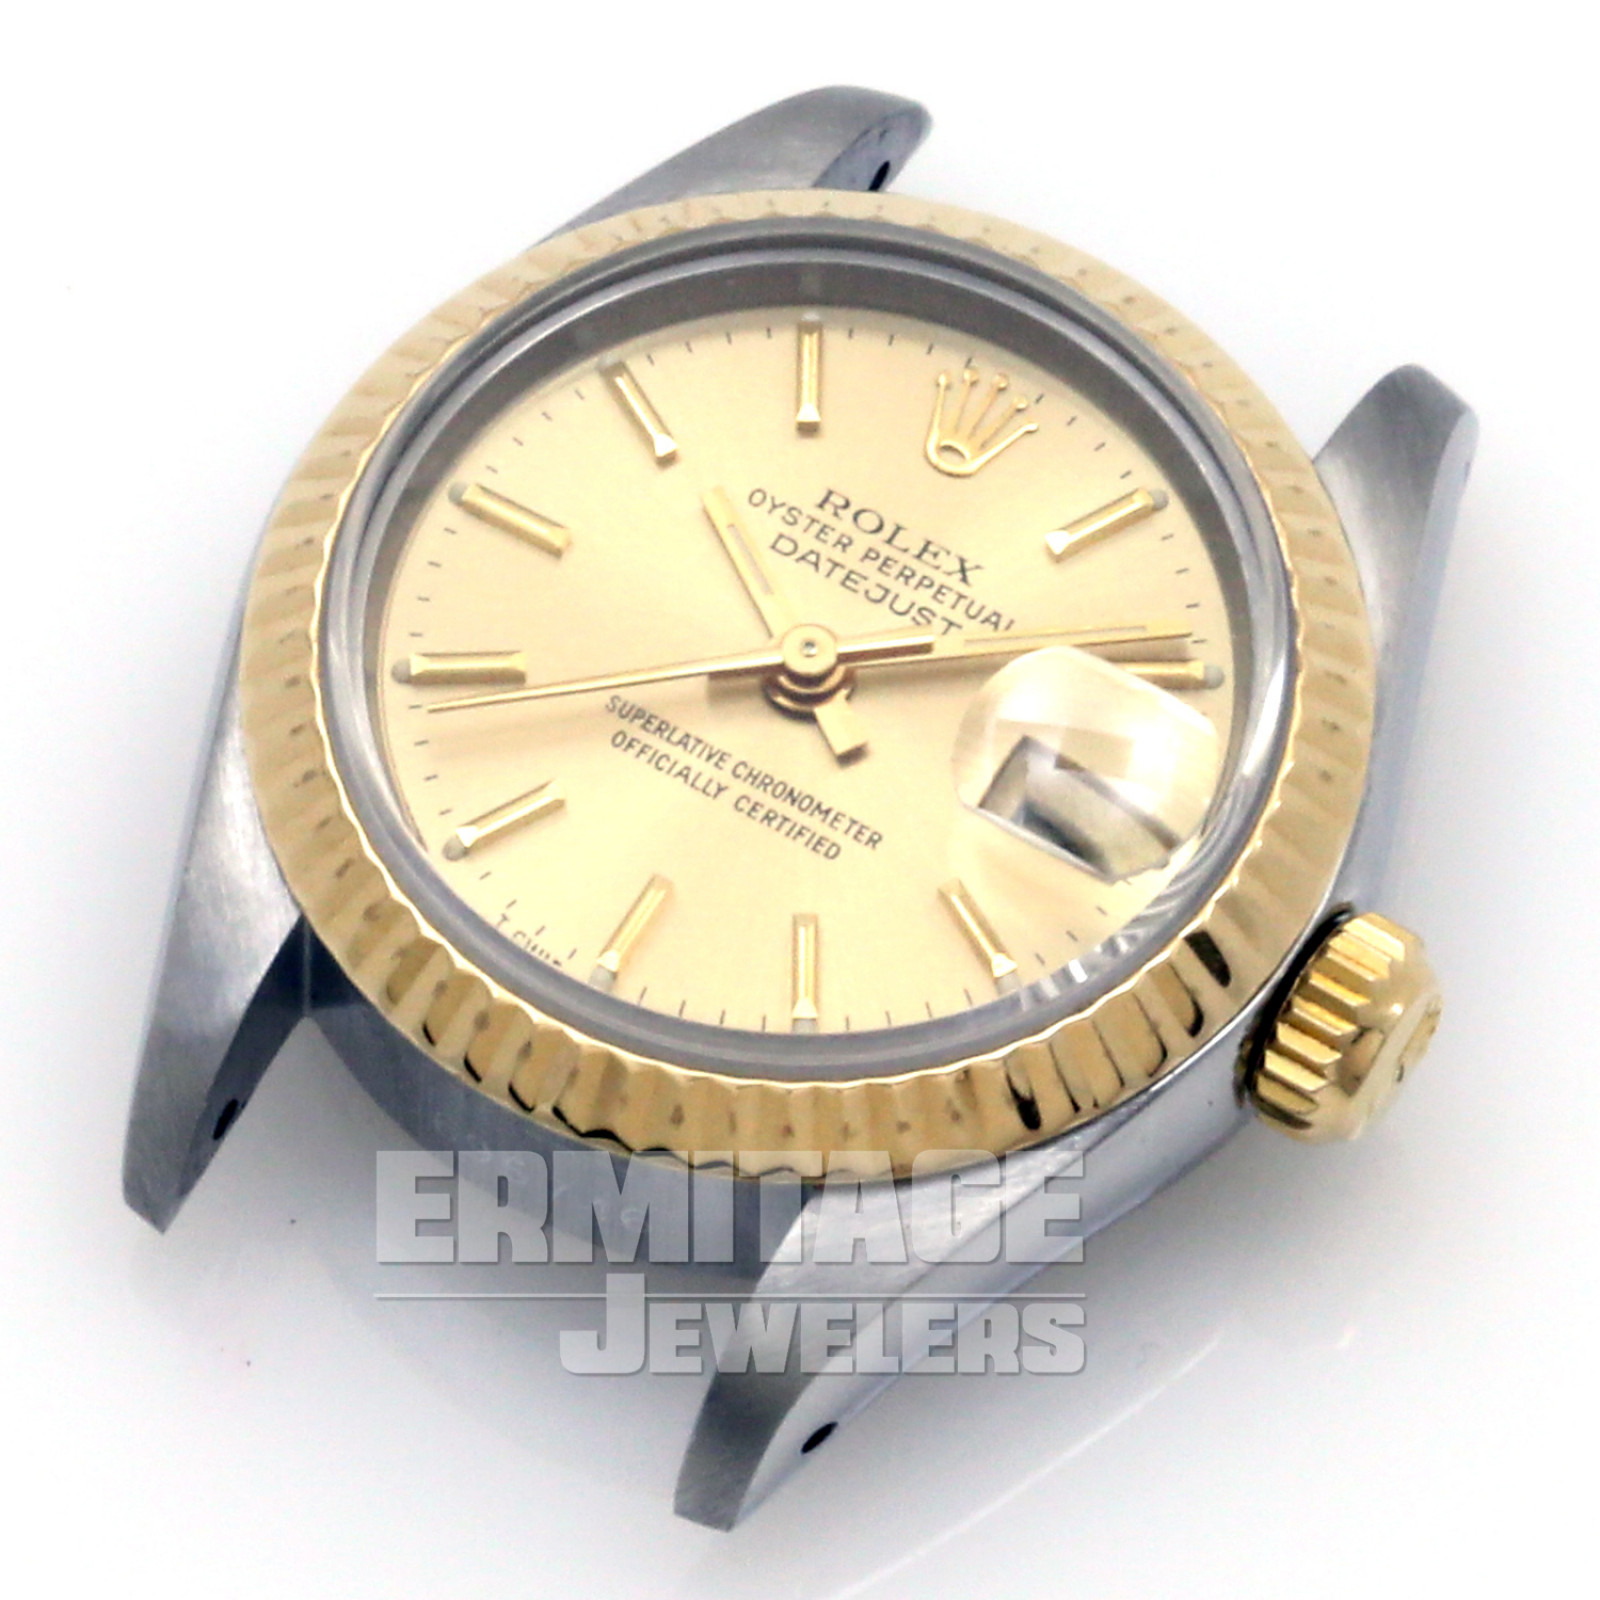 Pre-Owned Gold & Steel Rolex Datejust 69173 with Champagne Dial